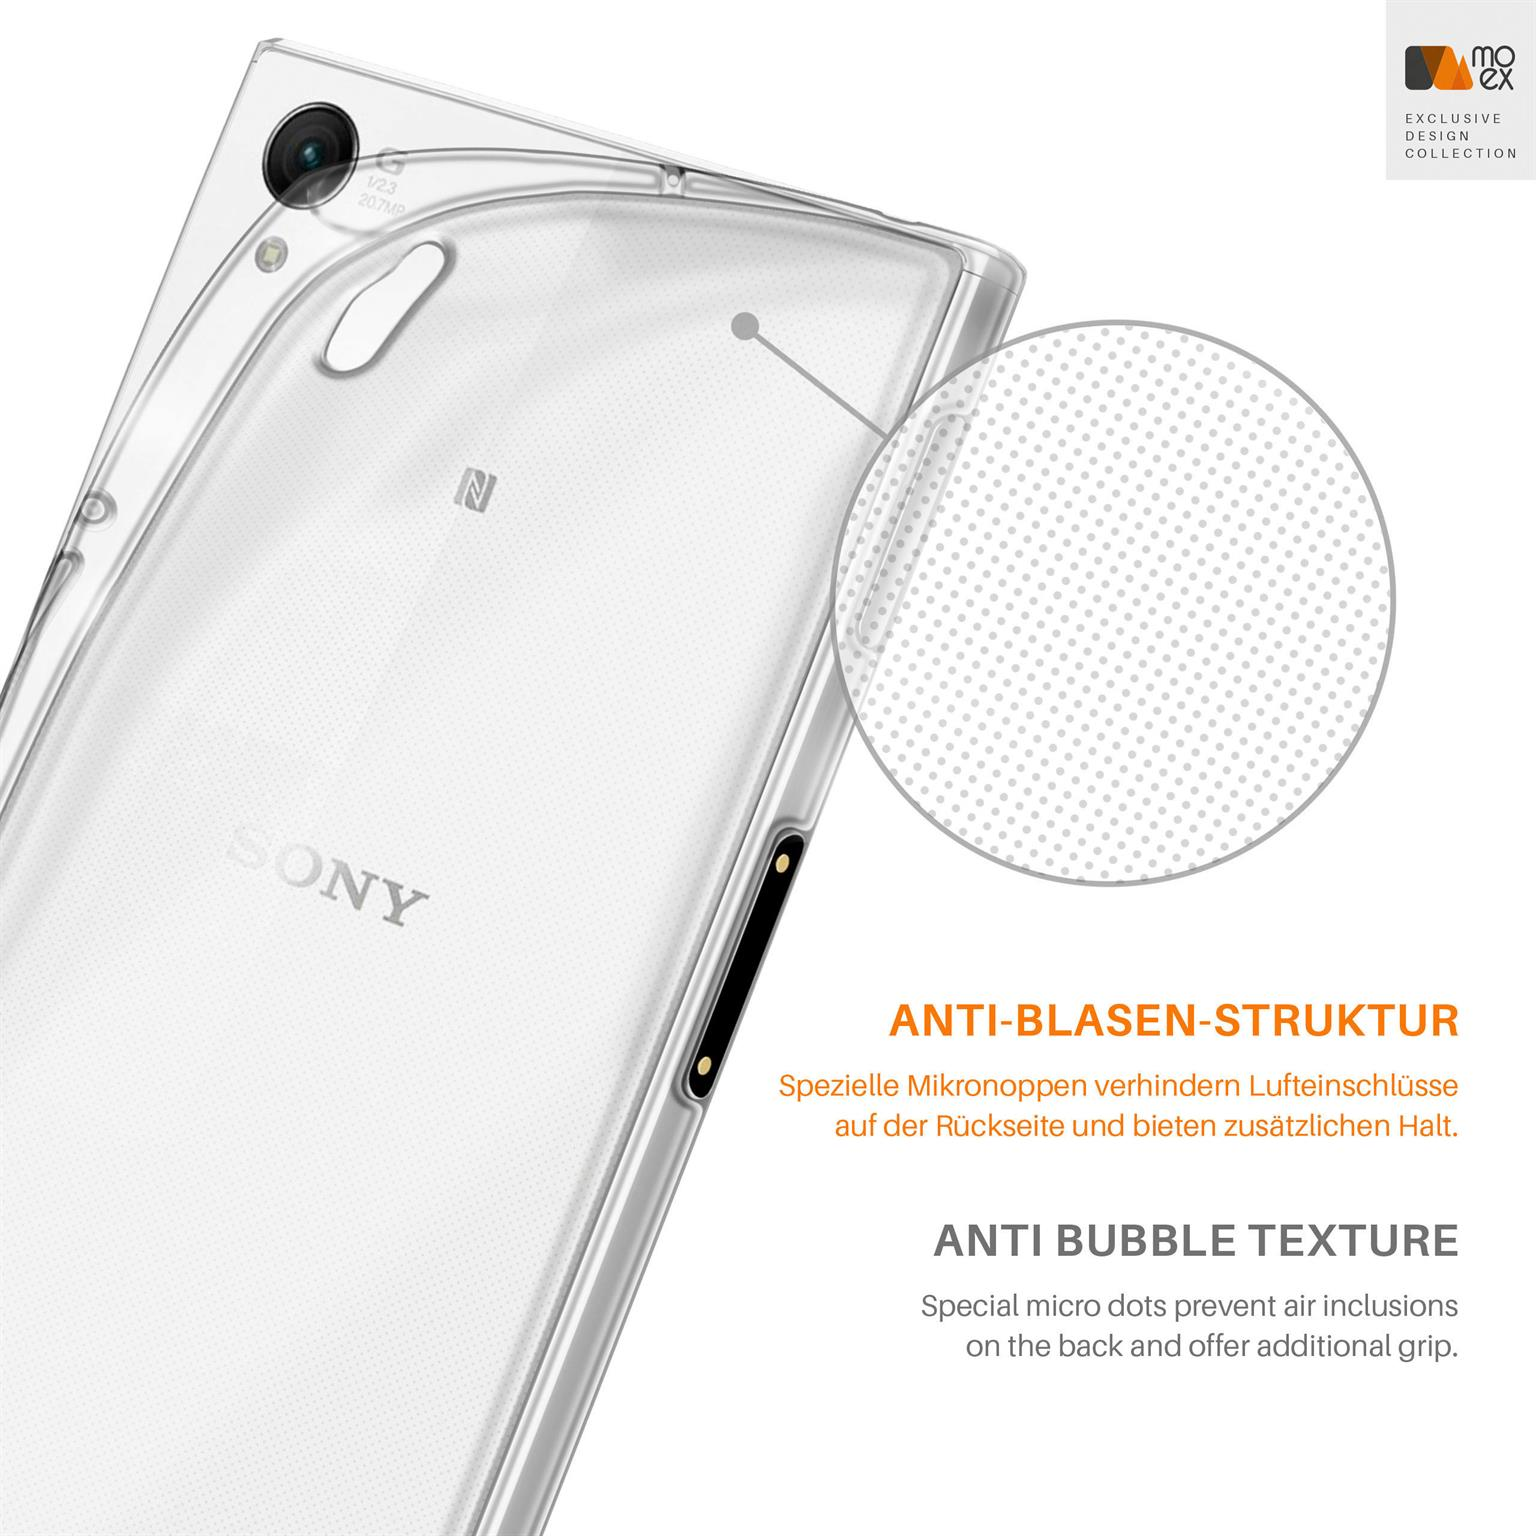 Crystal-Clear Z1, Xperia Backcover, Aero MOEX Sony, Case,